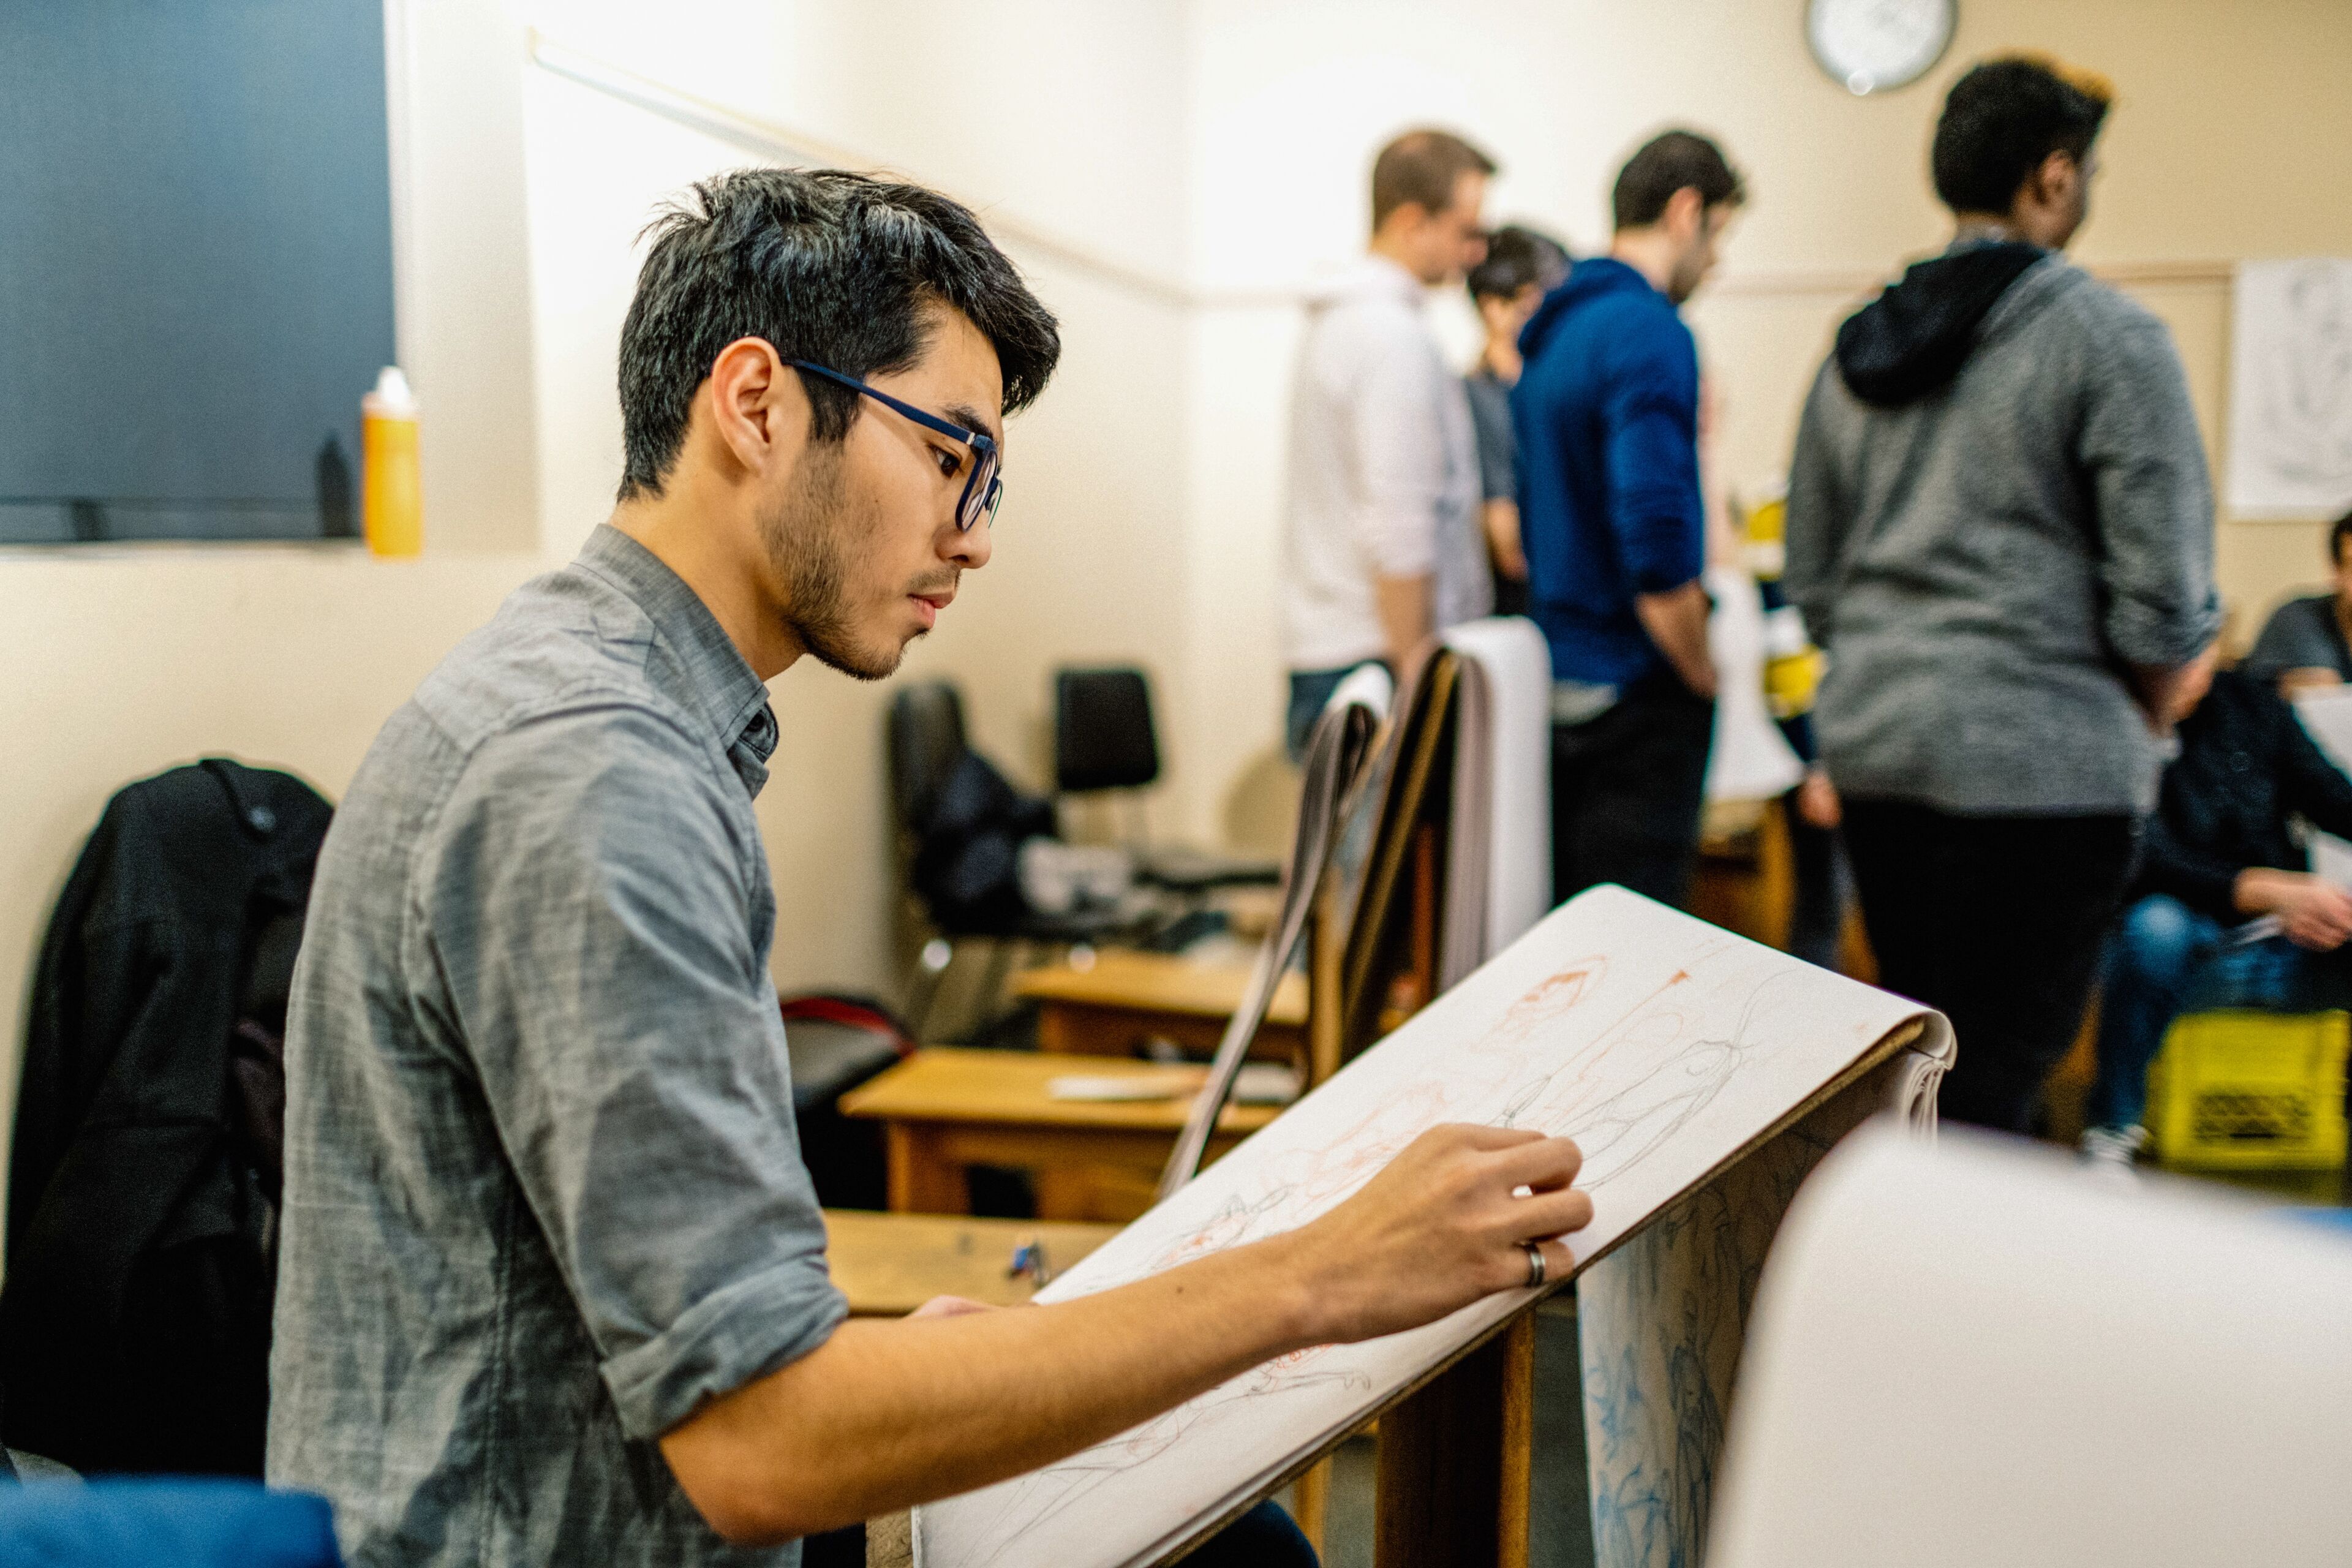 An artist intently sketches on a drawing board, immersed in a bustling classroom environment.